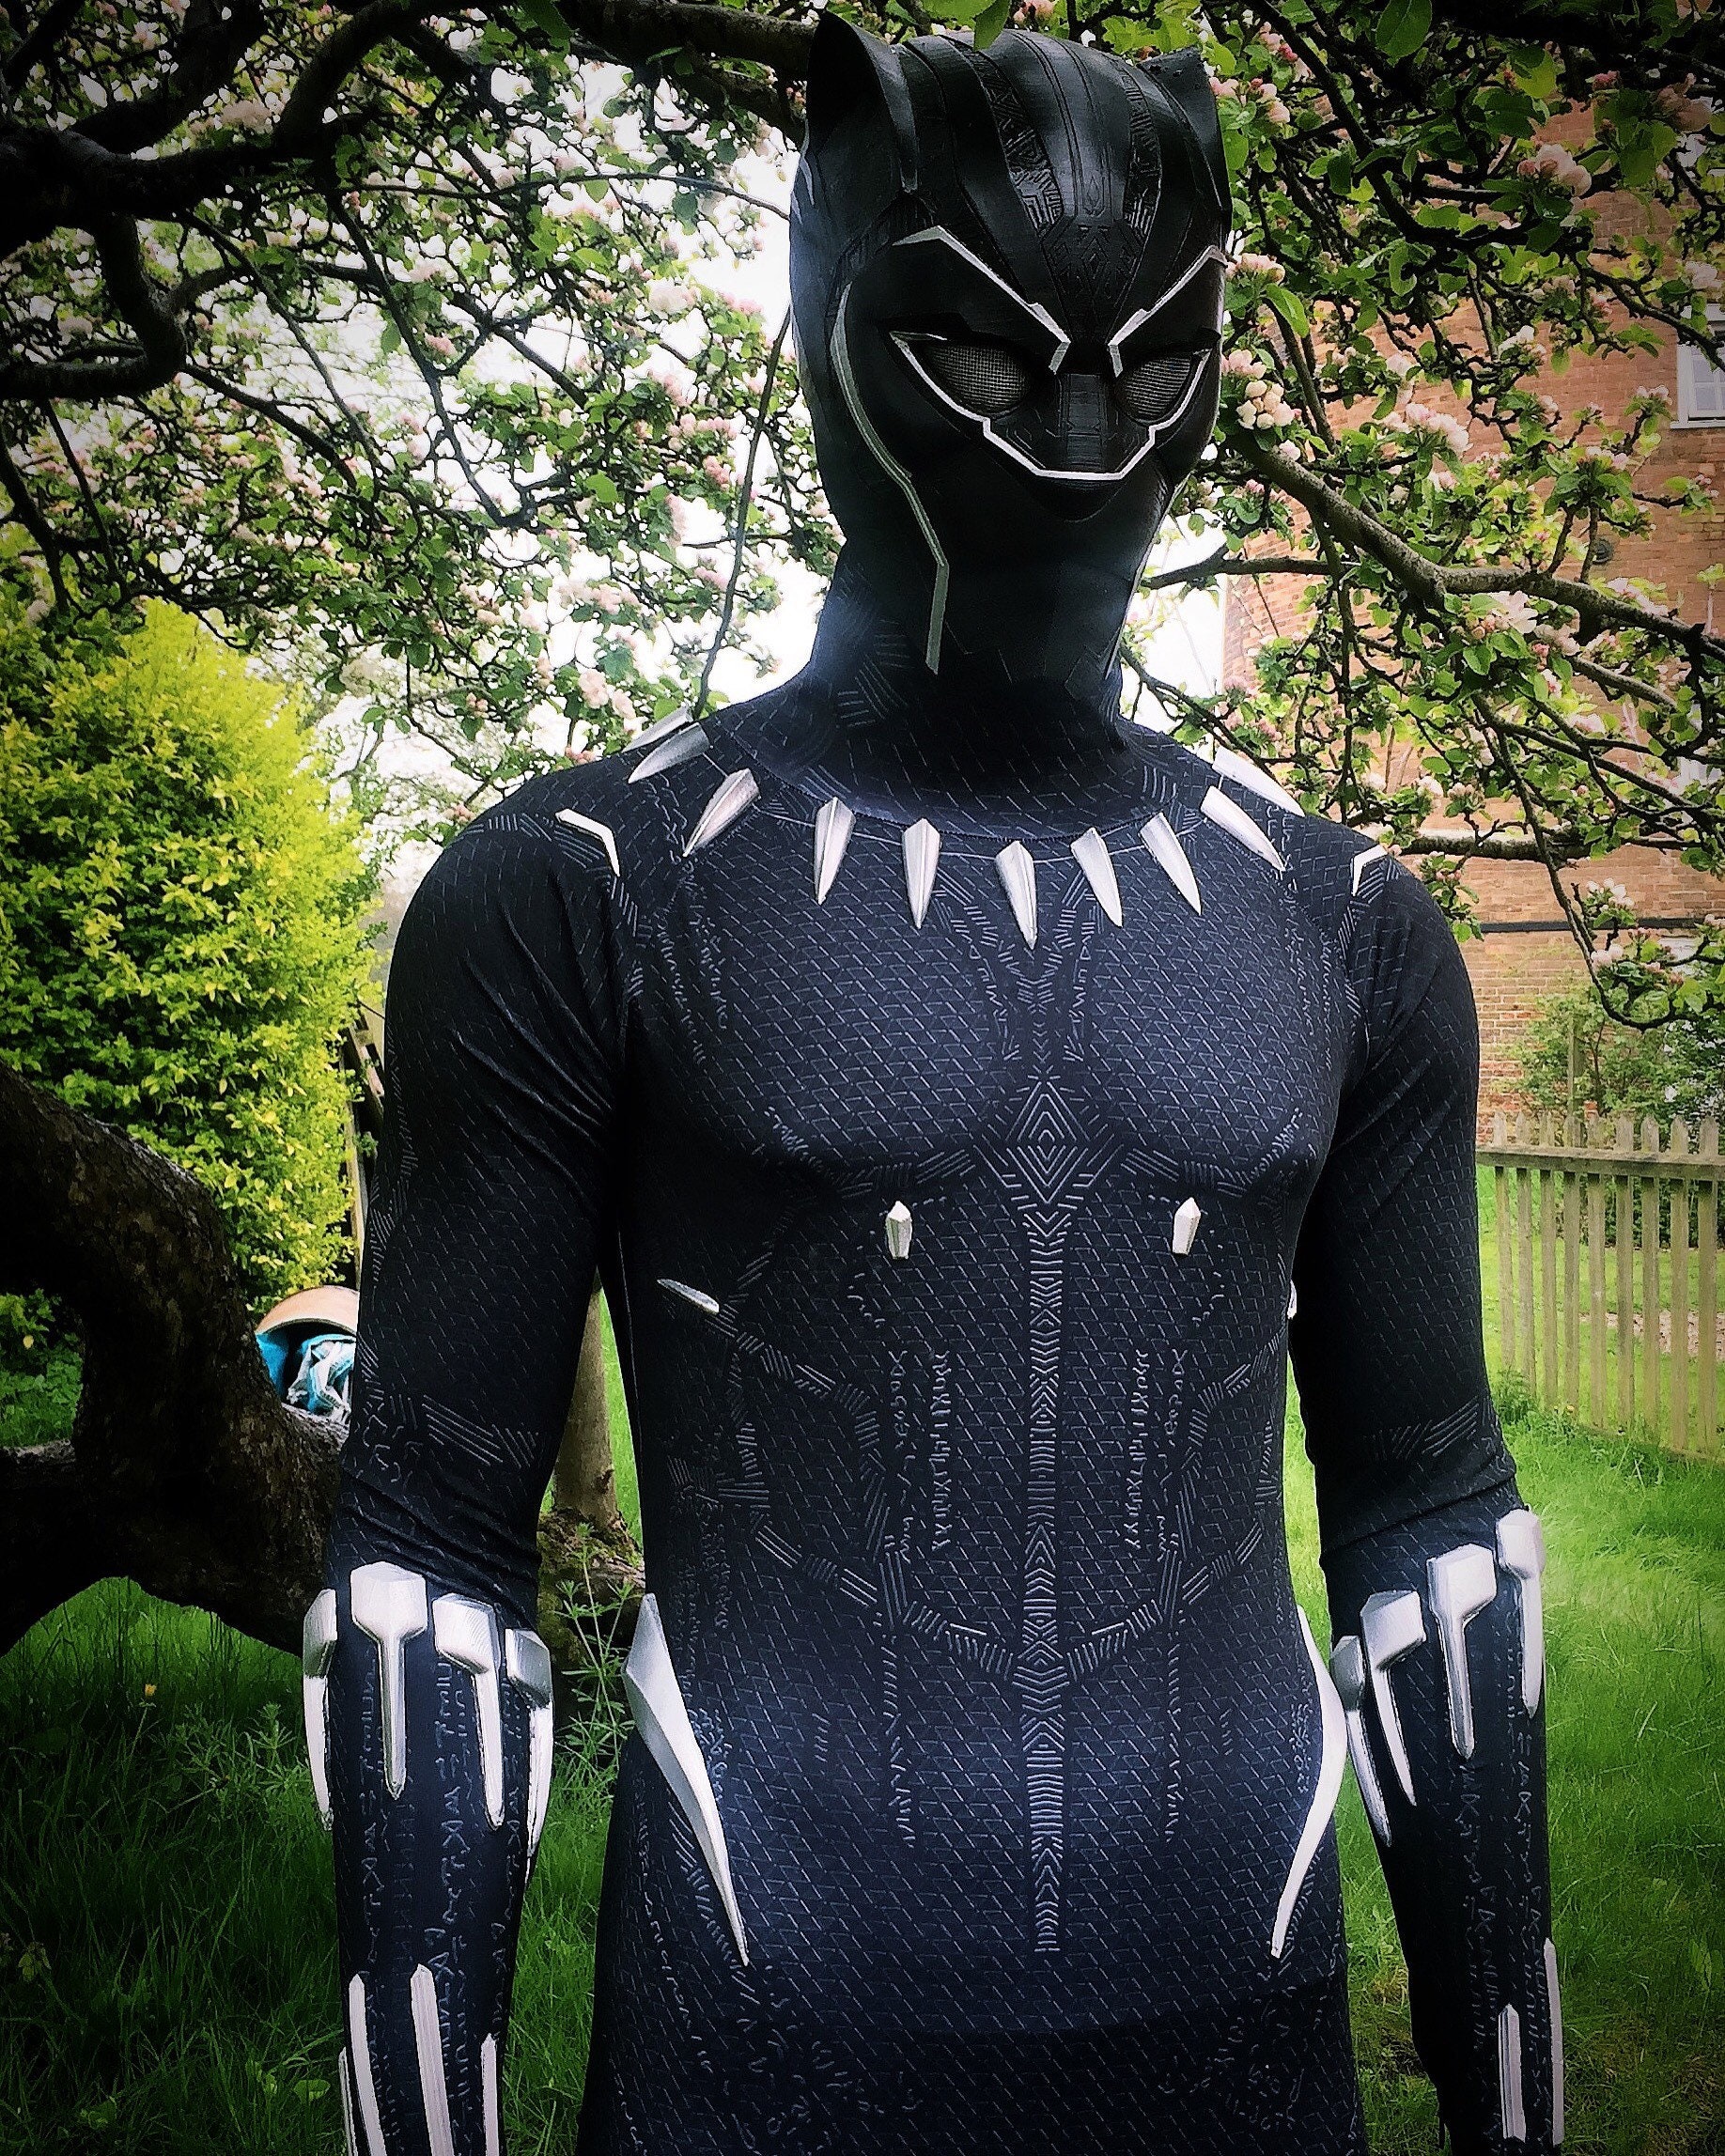 2018 Black Panther Movie Costume Inspired With 3d Vibranium